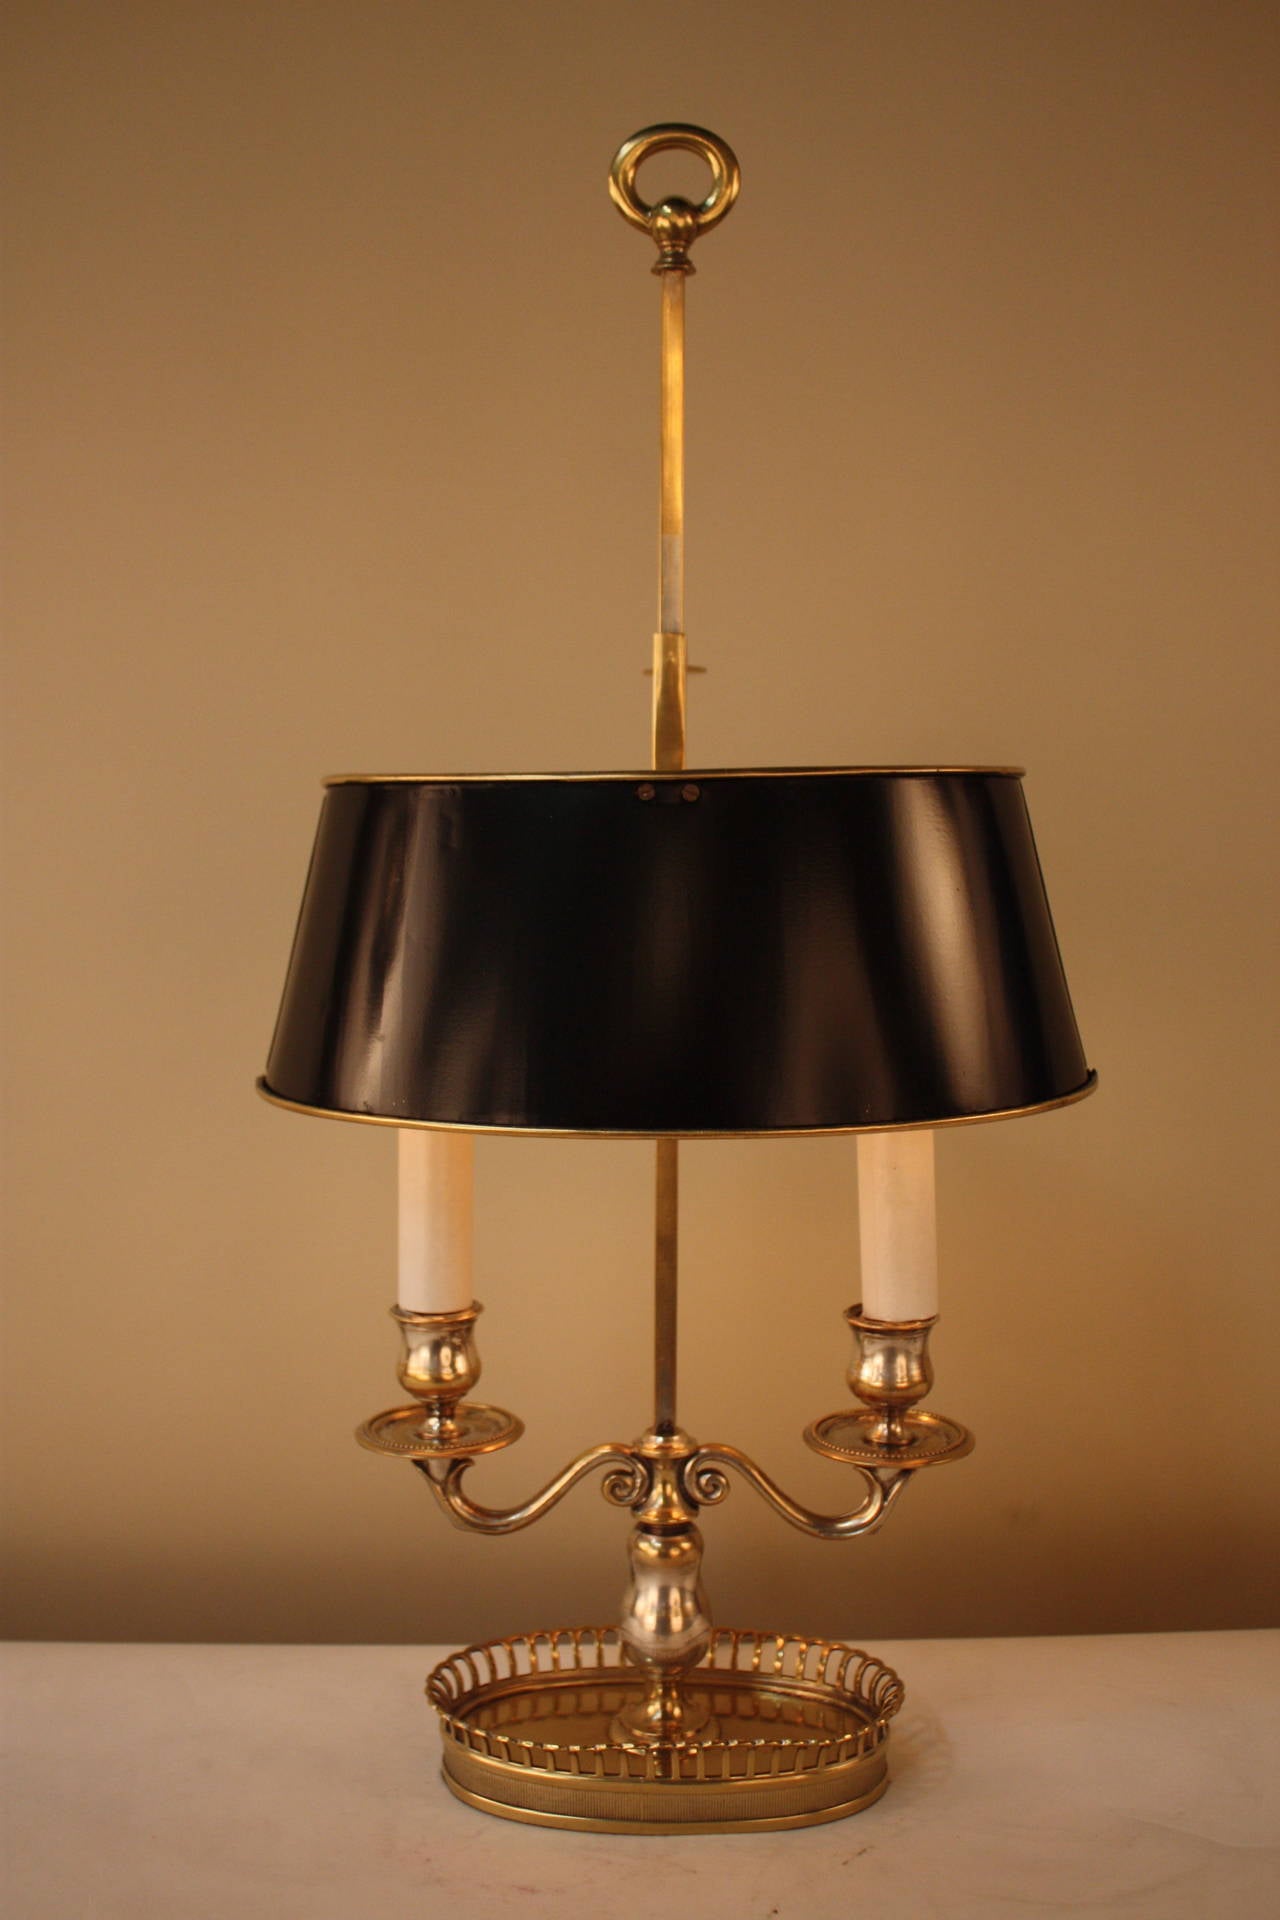 French 1930s double-light Bouillotte lamp which originally was silver plated but has since faded and now is mostly gone which lets the brilliant bronze show that gives a unique look to the lamp.